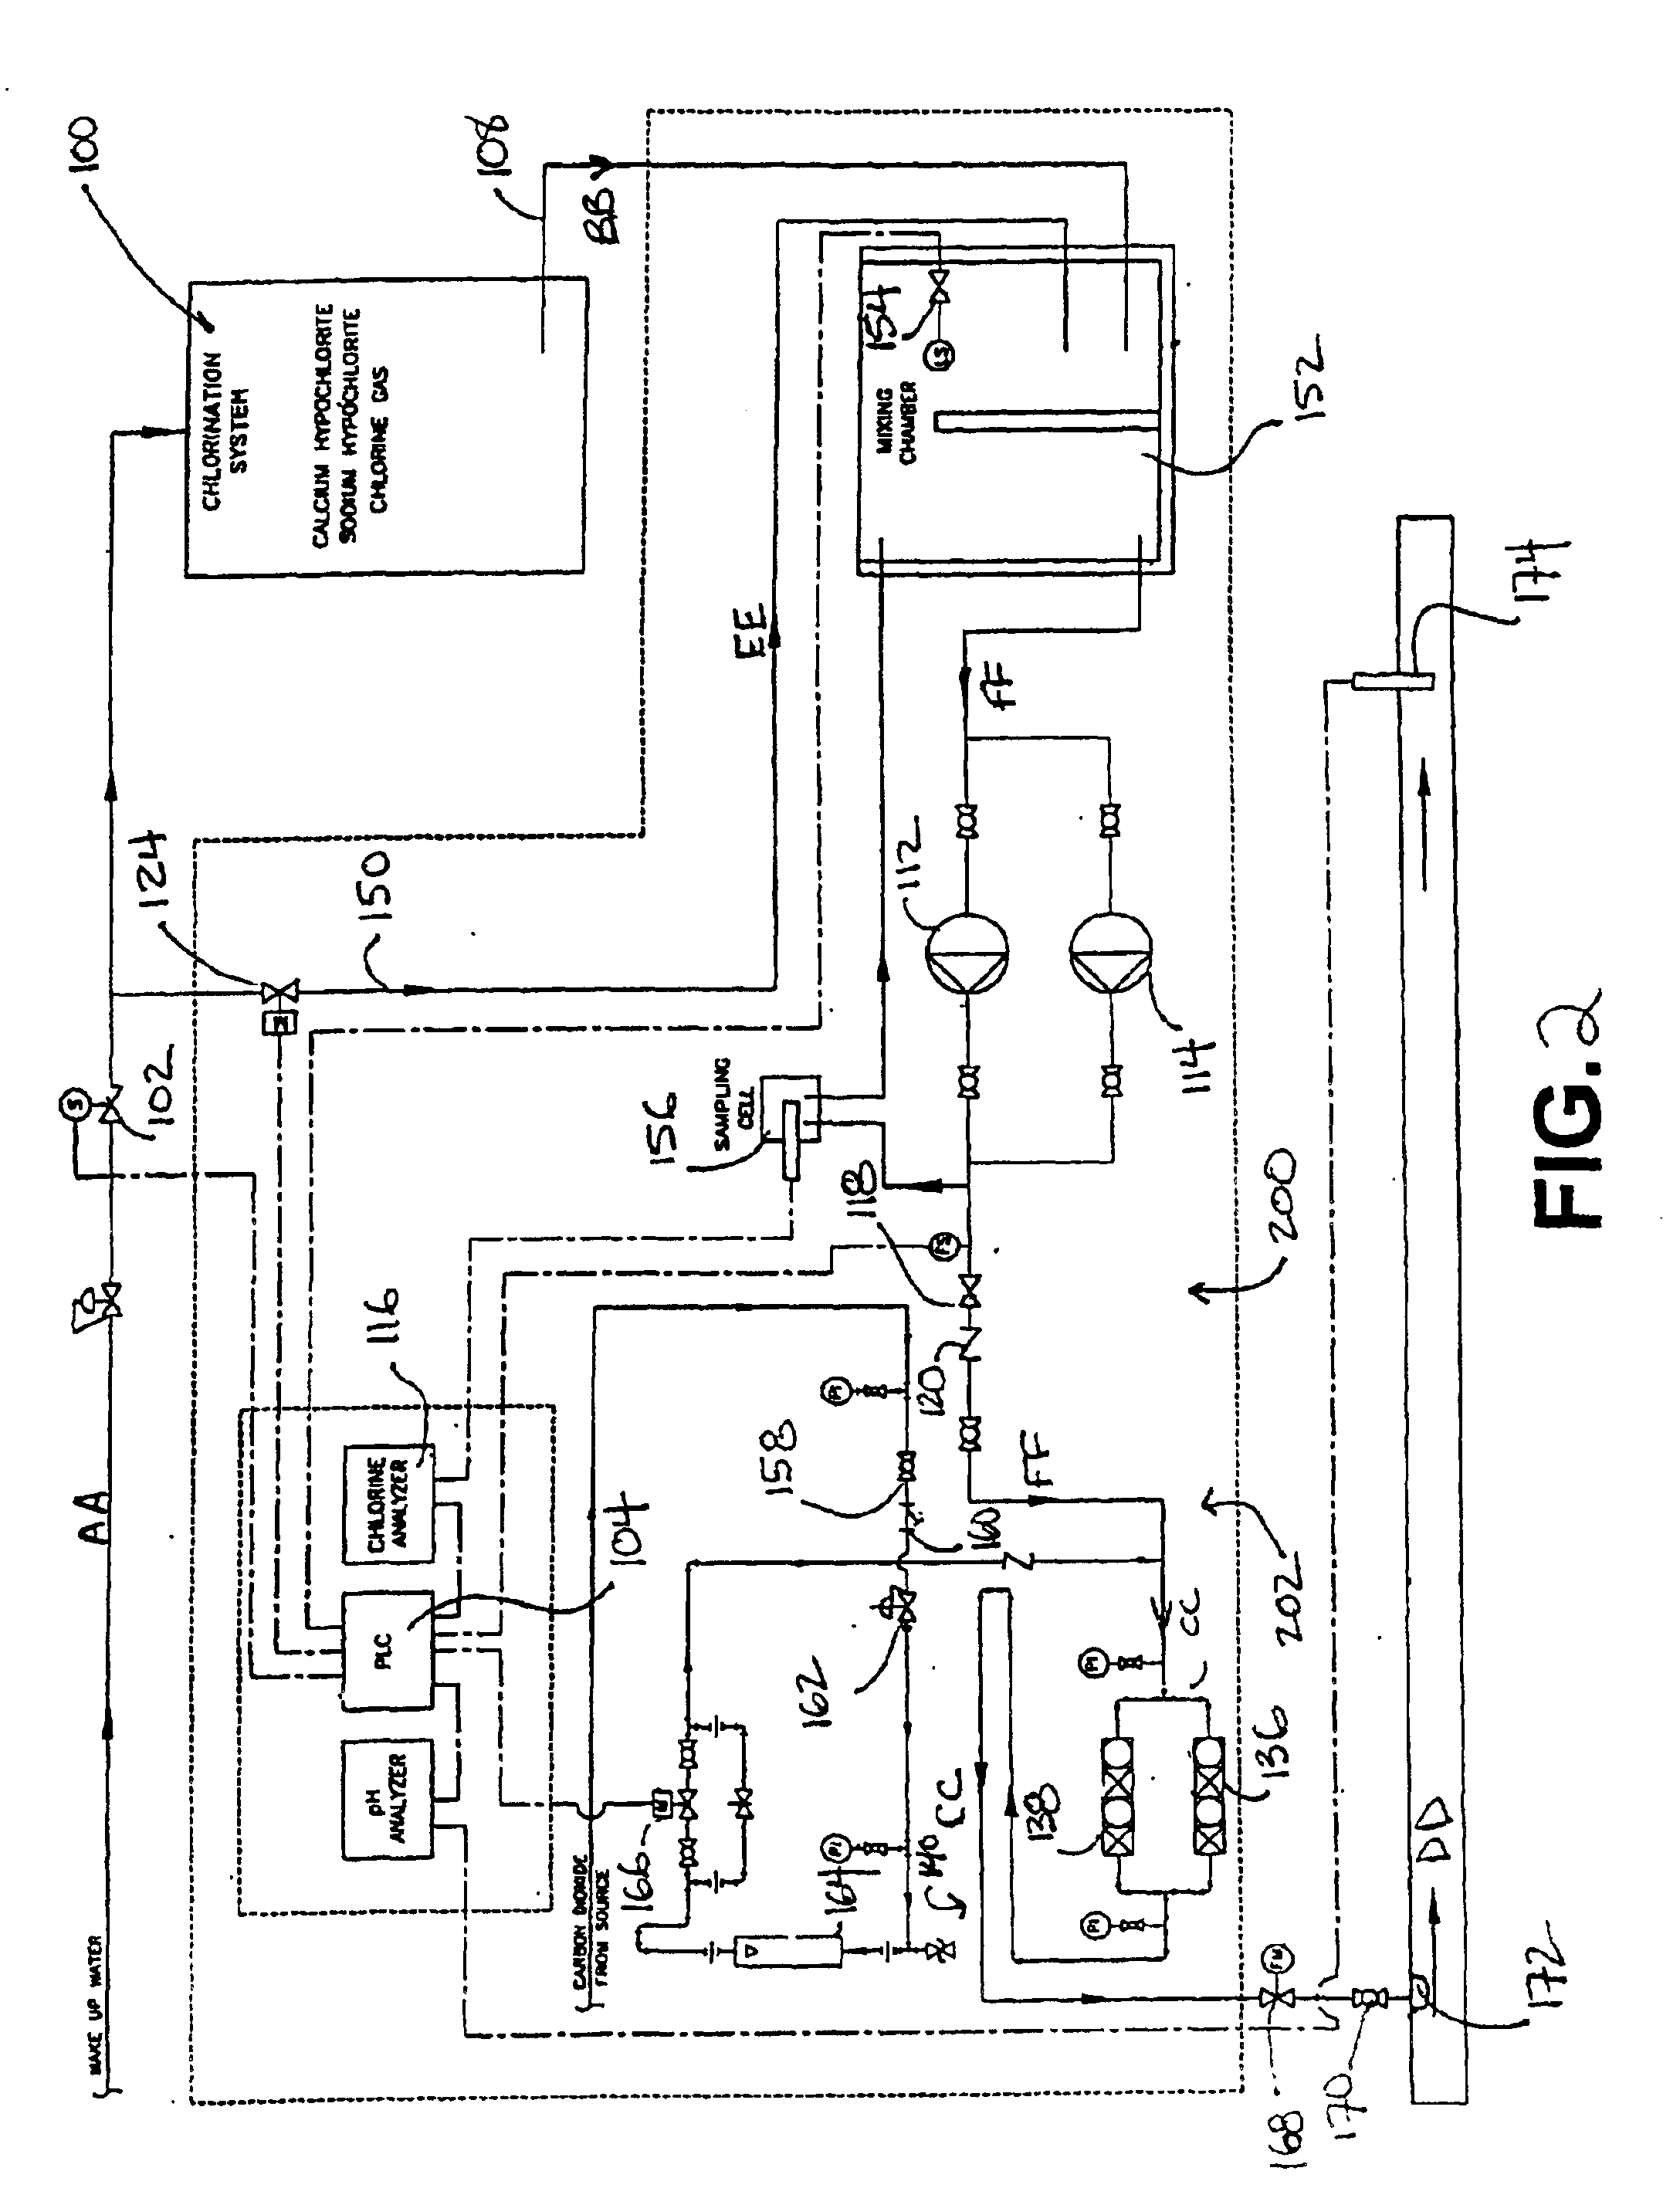 Pressurized solution feed system for introducing hypochlorous acid to a fluid stream